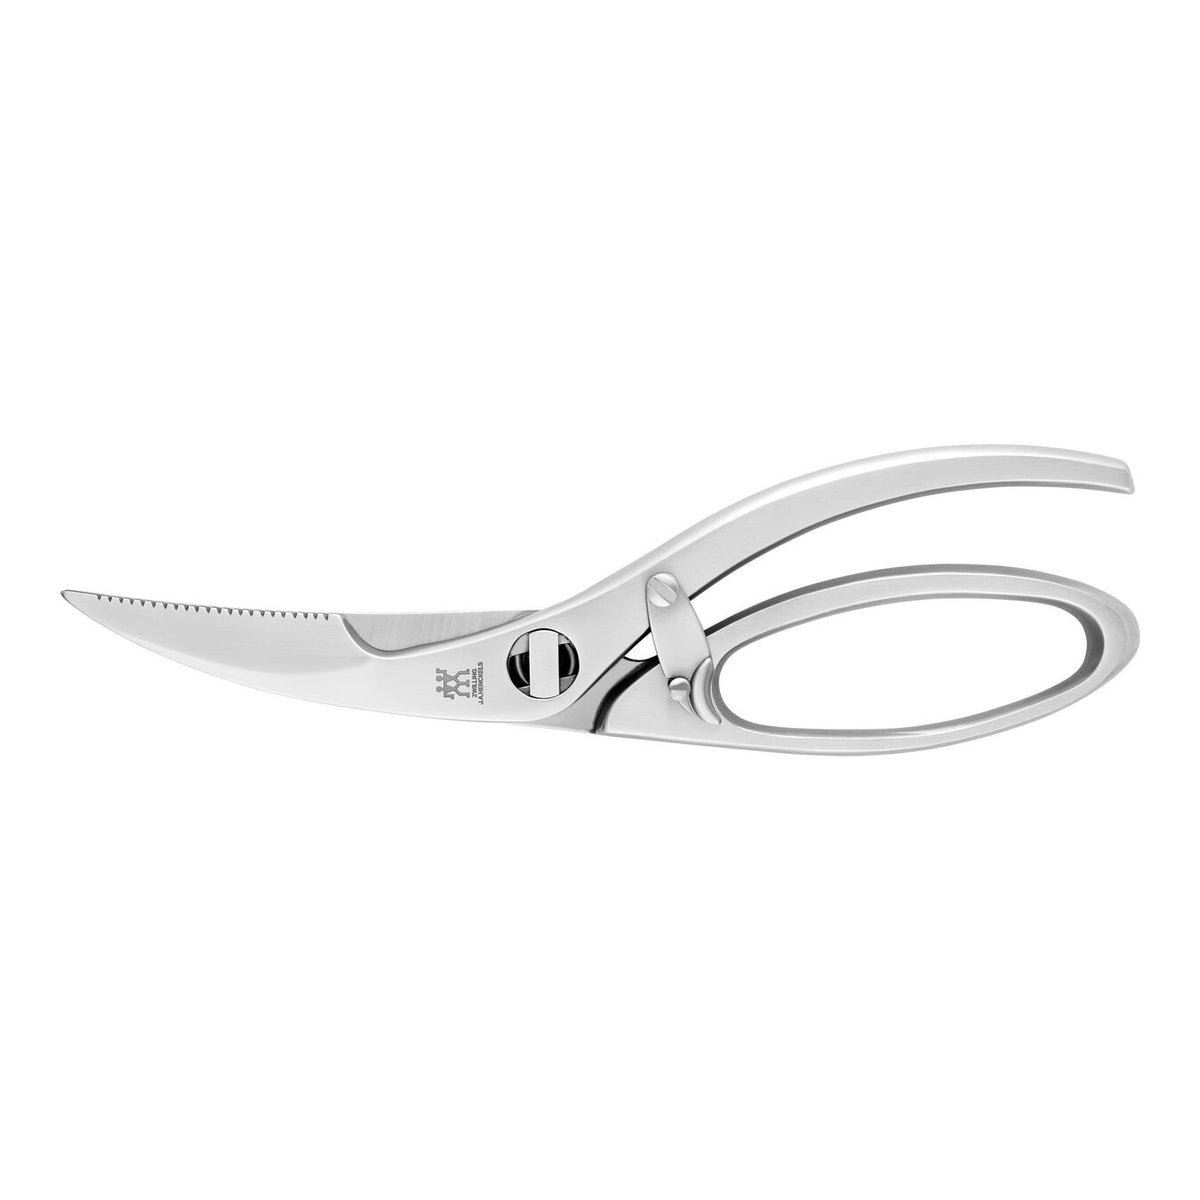 Stainless Steel Poultry Shears – BBQ Butler